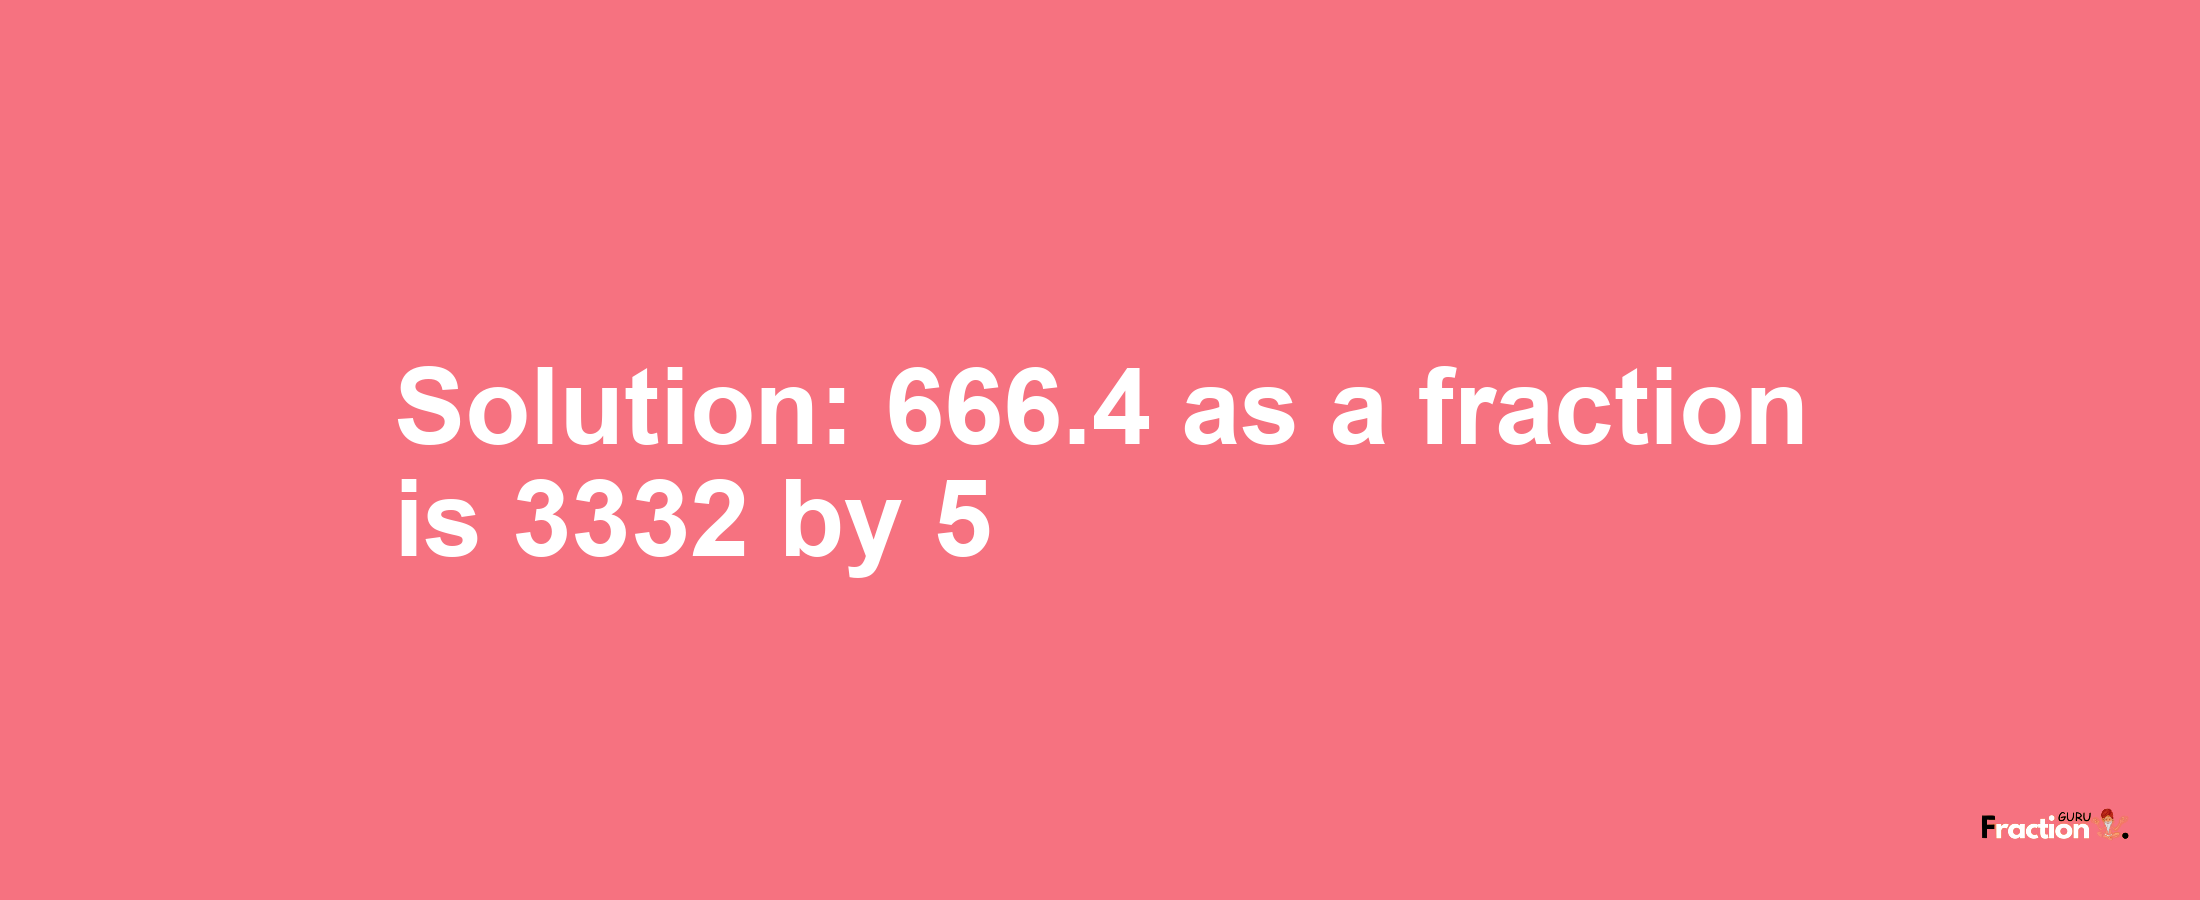 Solution:666.4 as a fraction is 3332/5